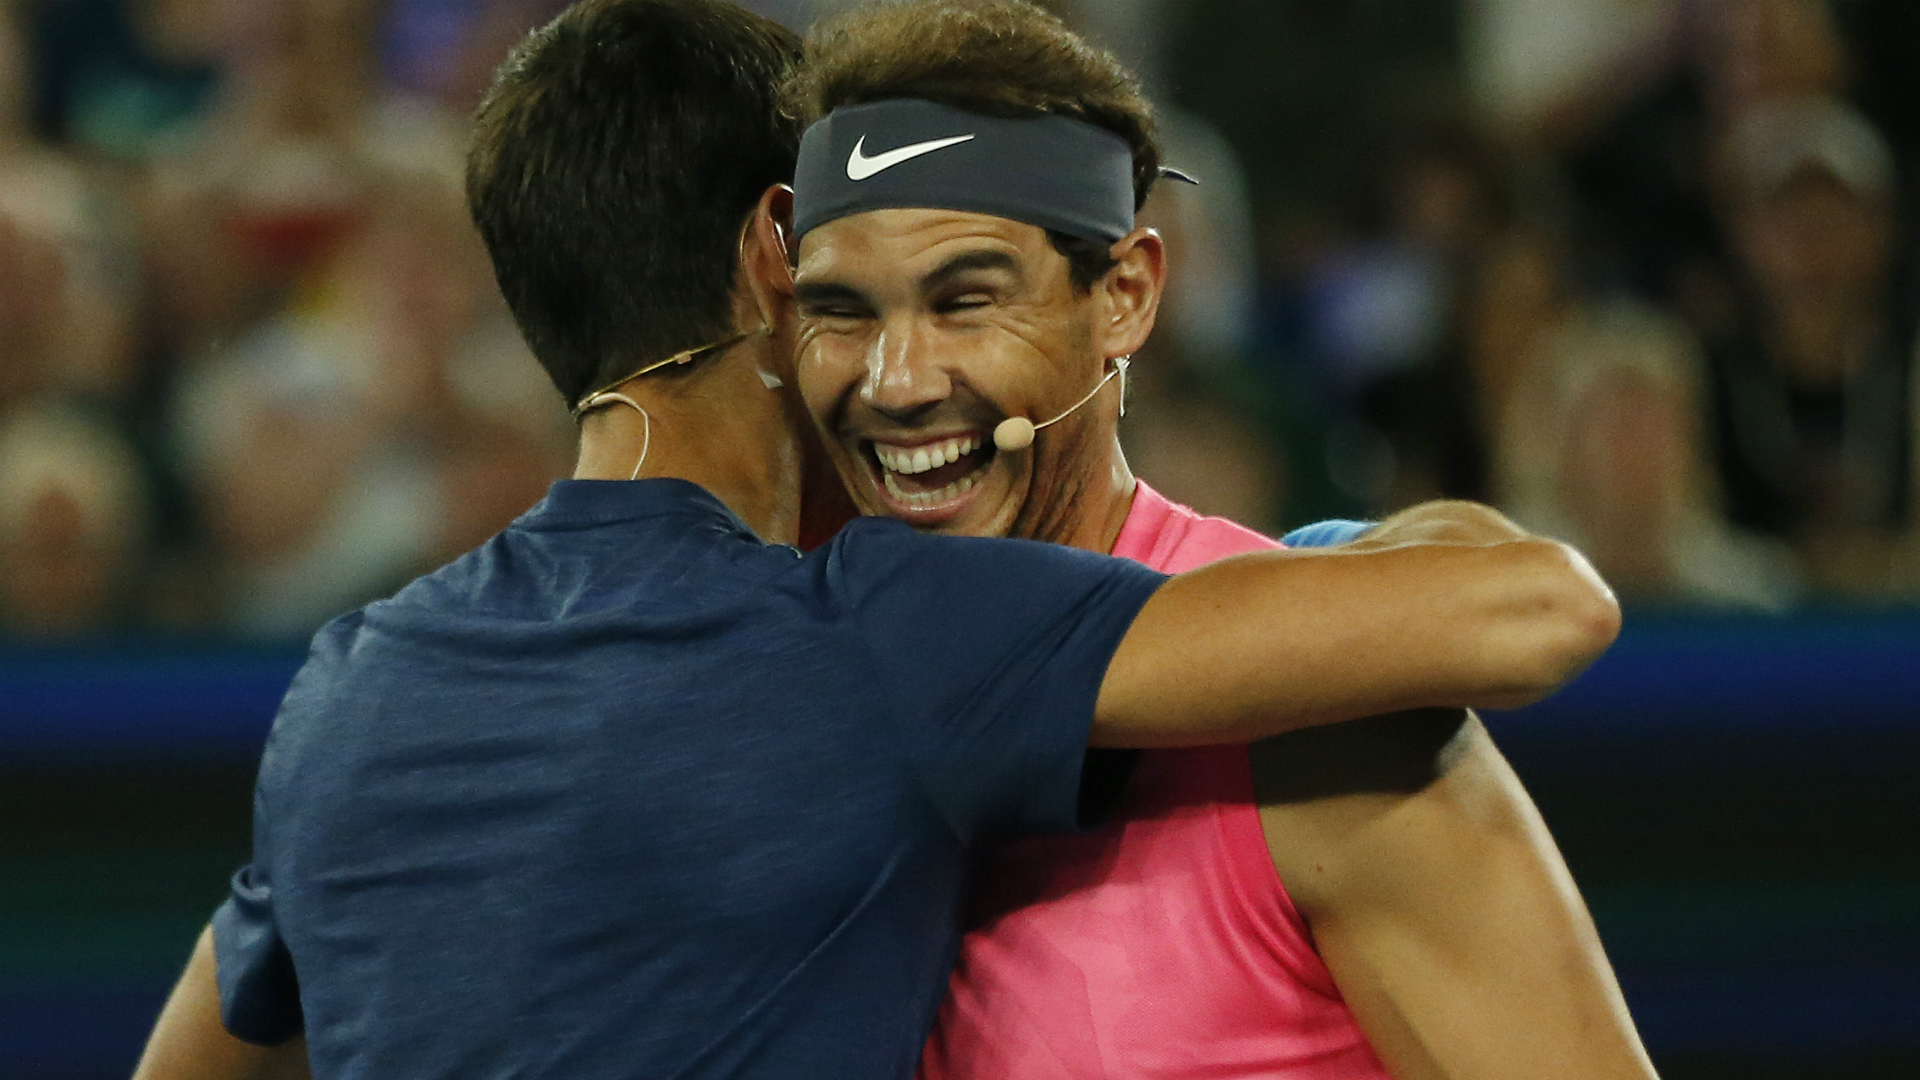 As they appeared at an exhibition to raise funds for those affected by the Australian bushfires, Rafael Nadal announced a big donation.